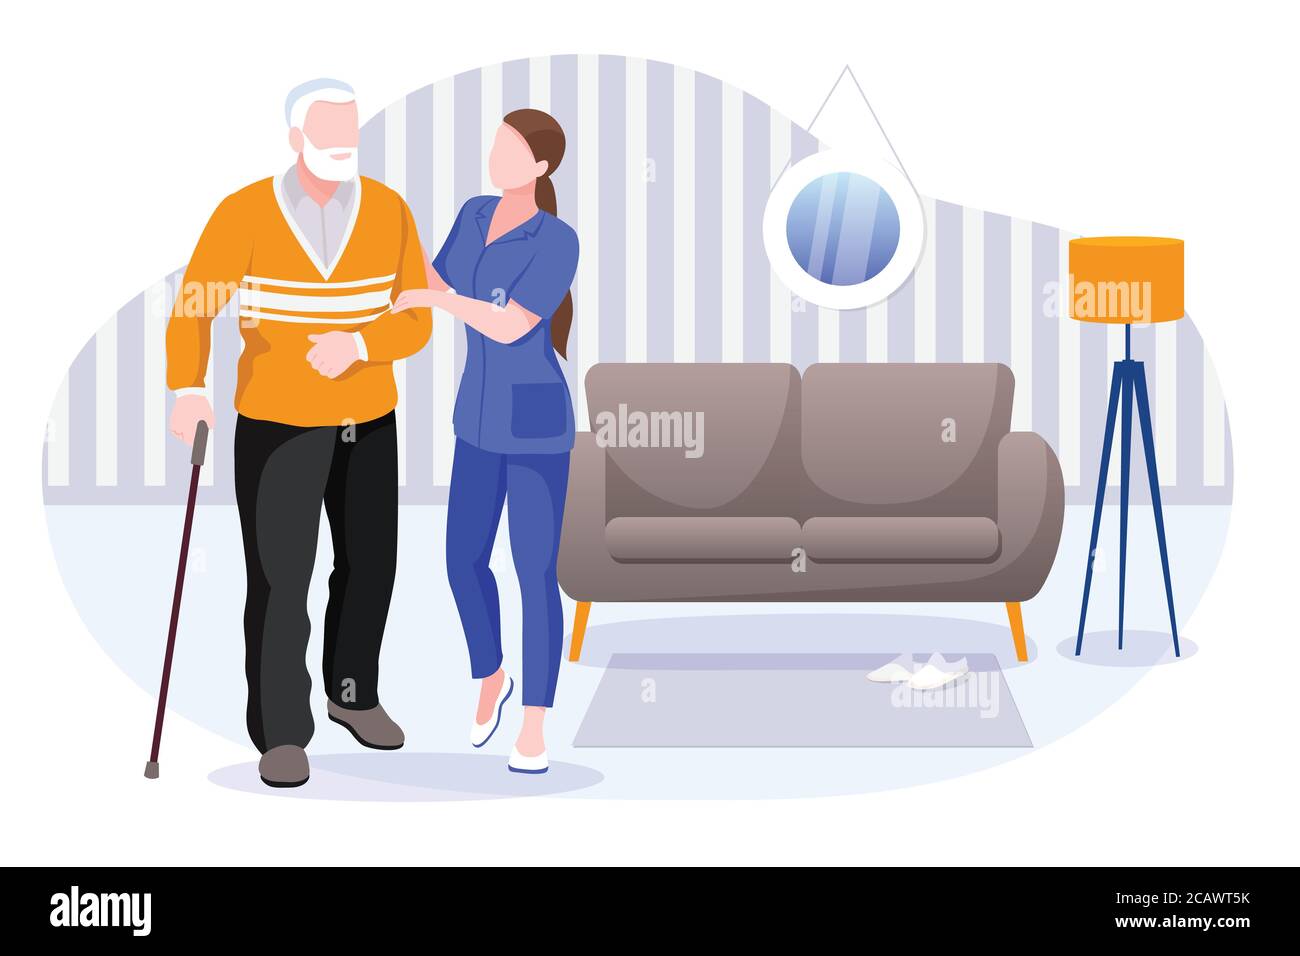 Home care services for seniors. Nurse or volunteer worker taking care of elderly disabled man. Vector flat cartoon characters and room interior illust Stock Vector